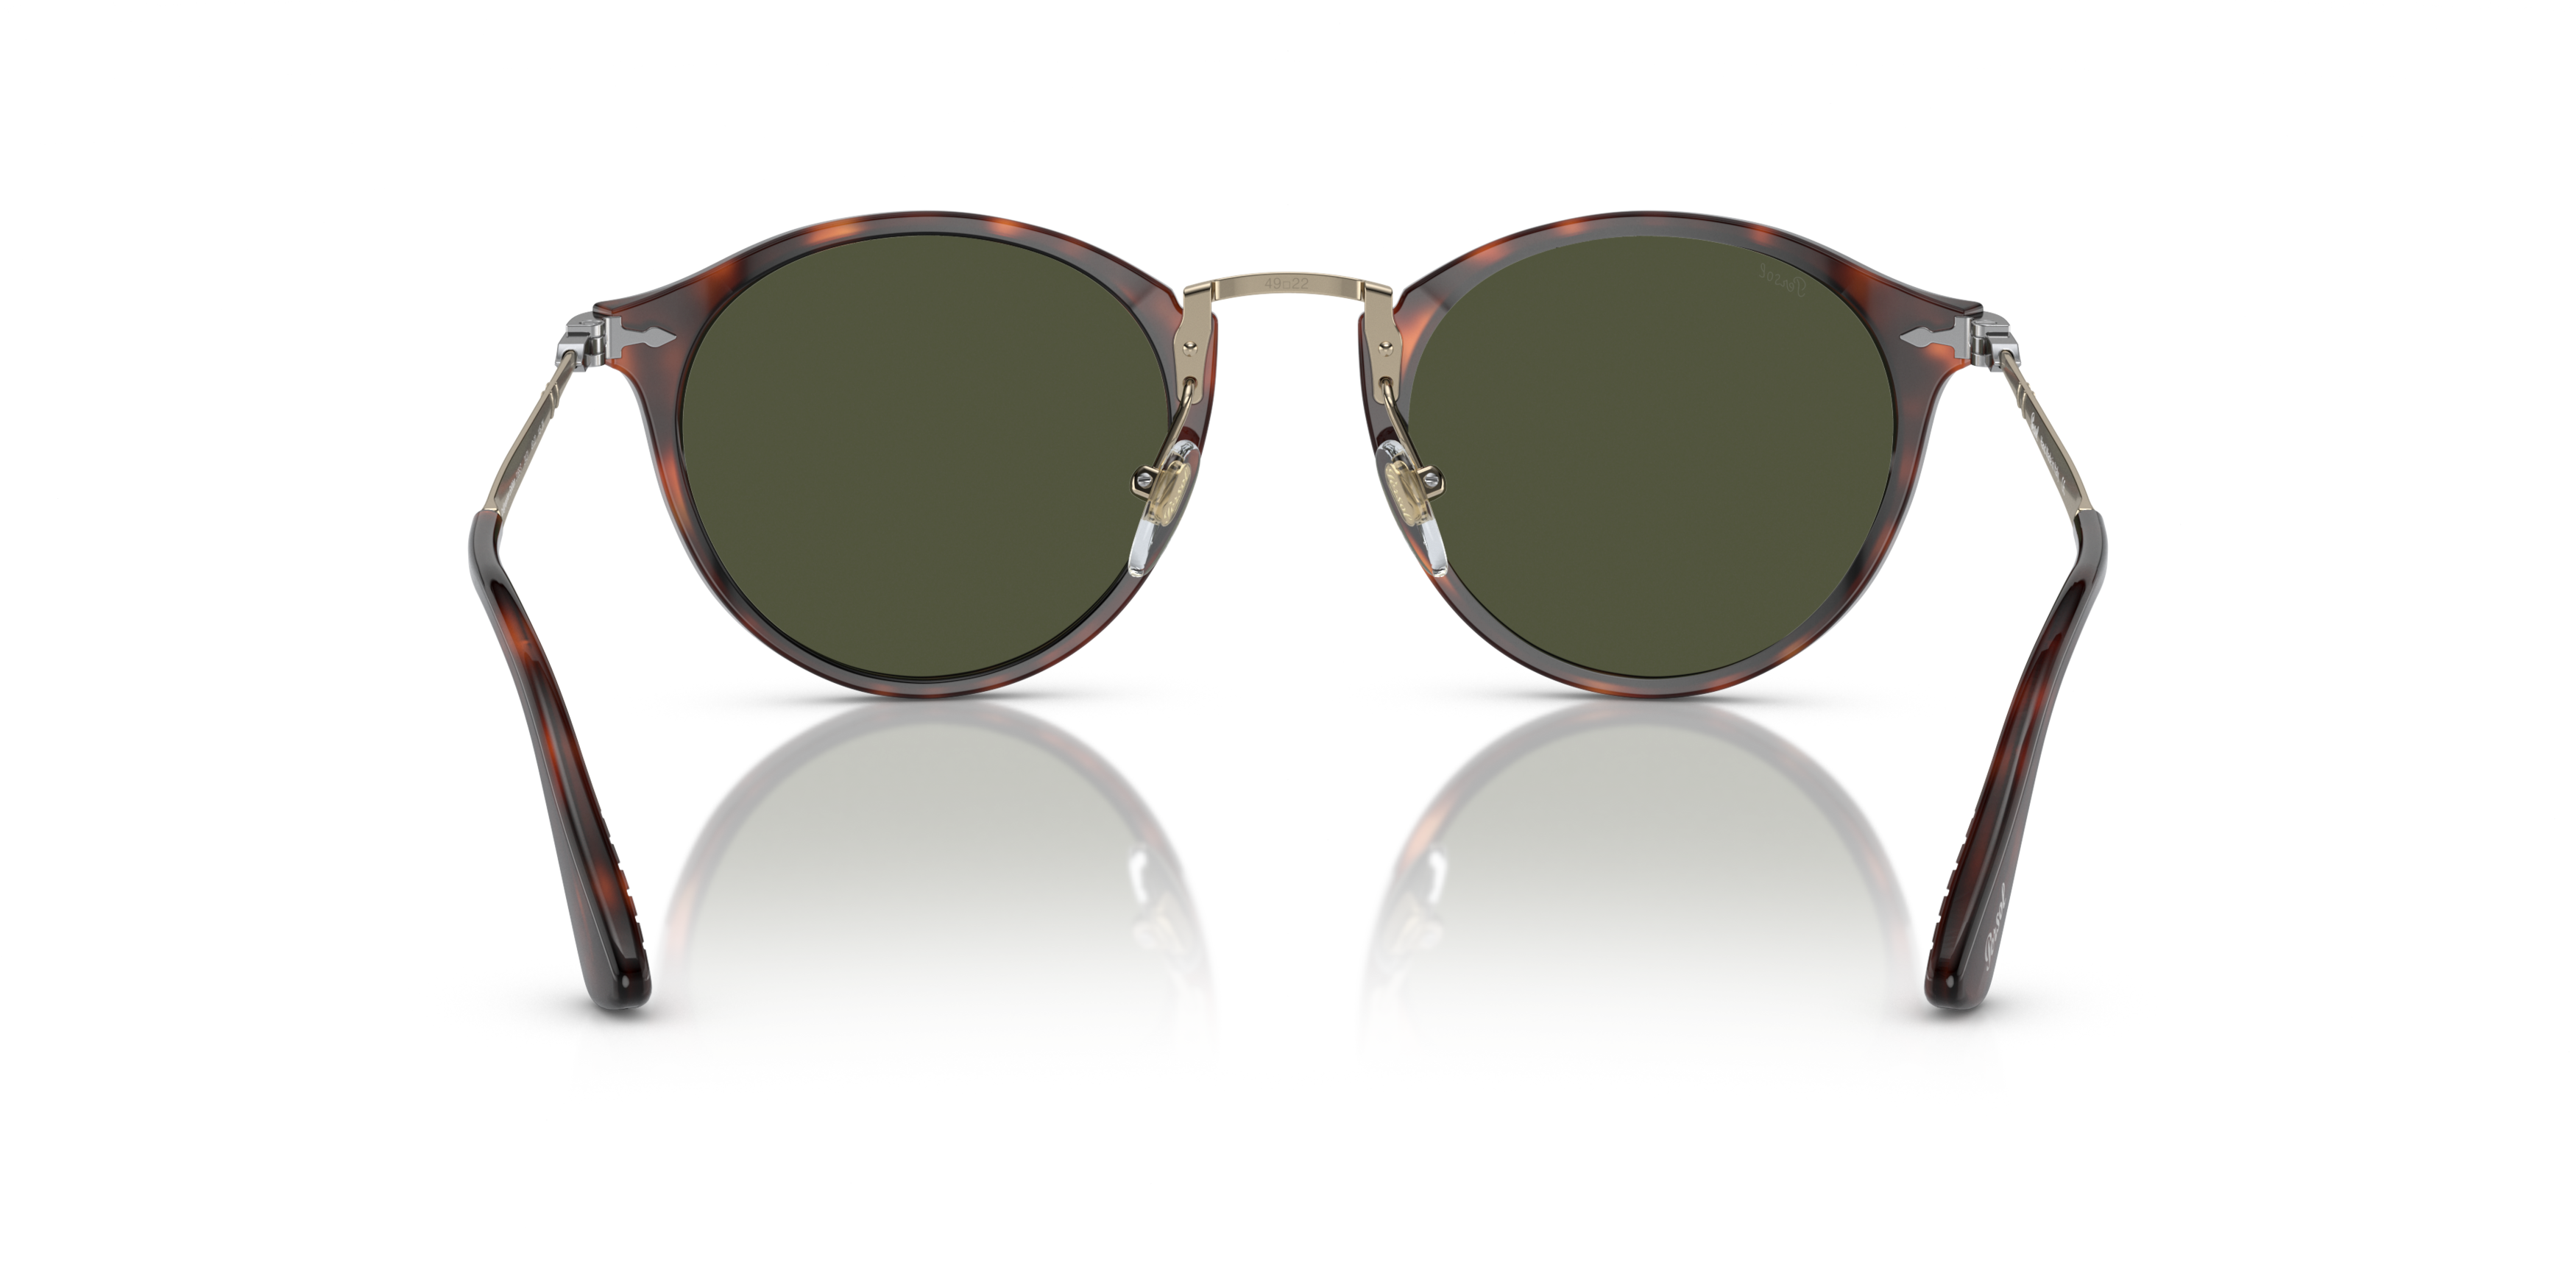 [products.image.detail02] PERSOL PO3166S 24/31